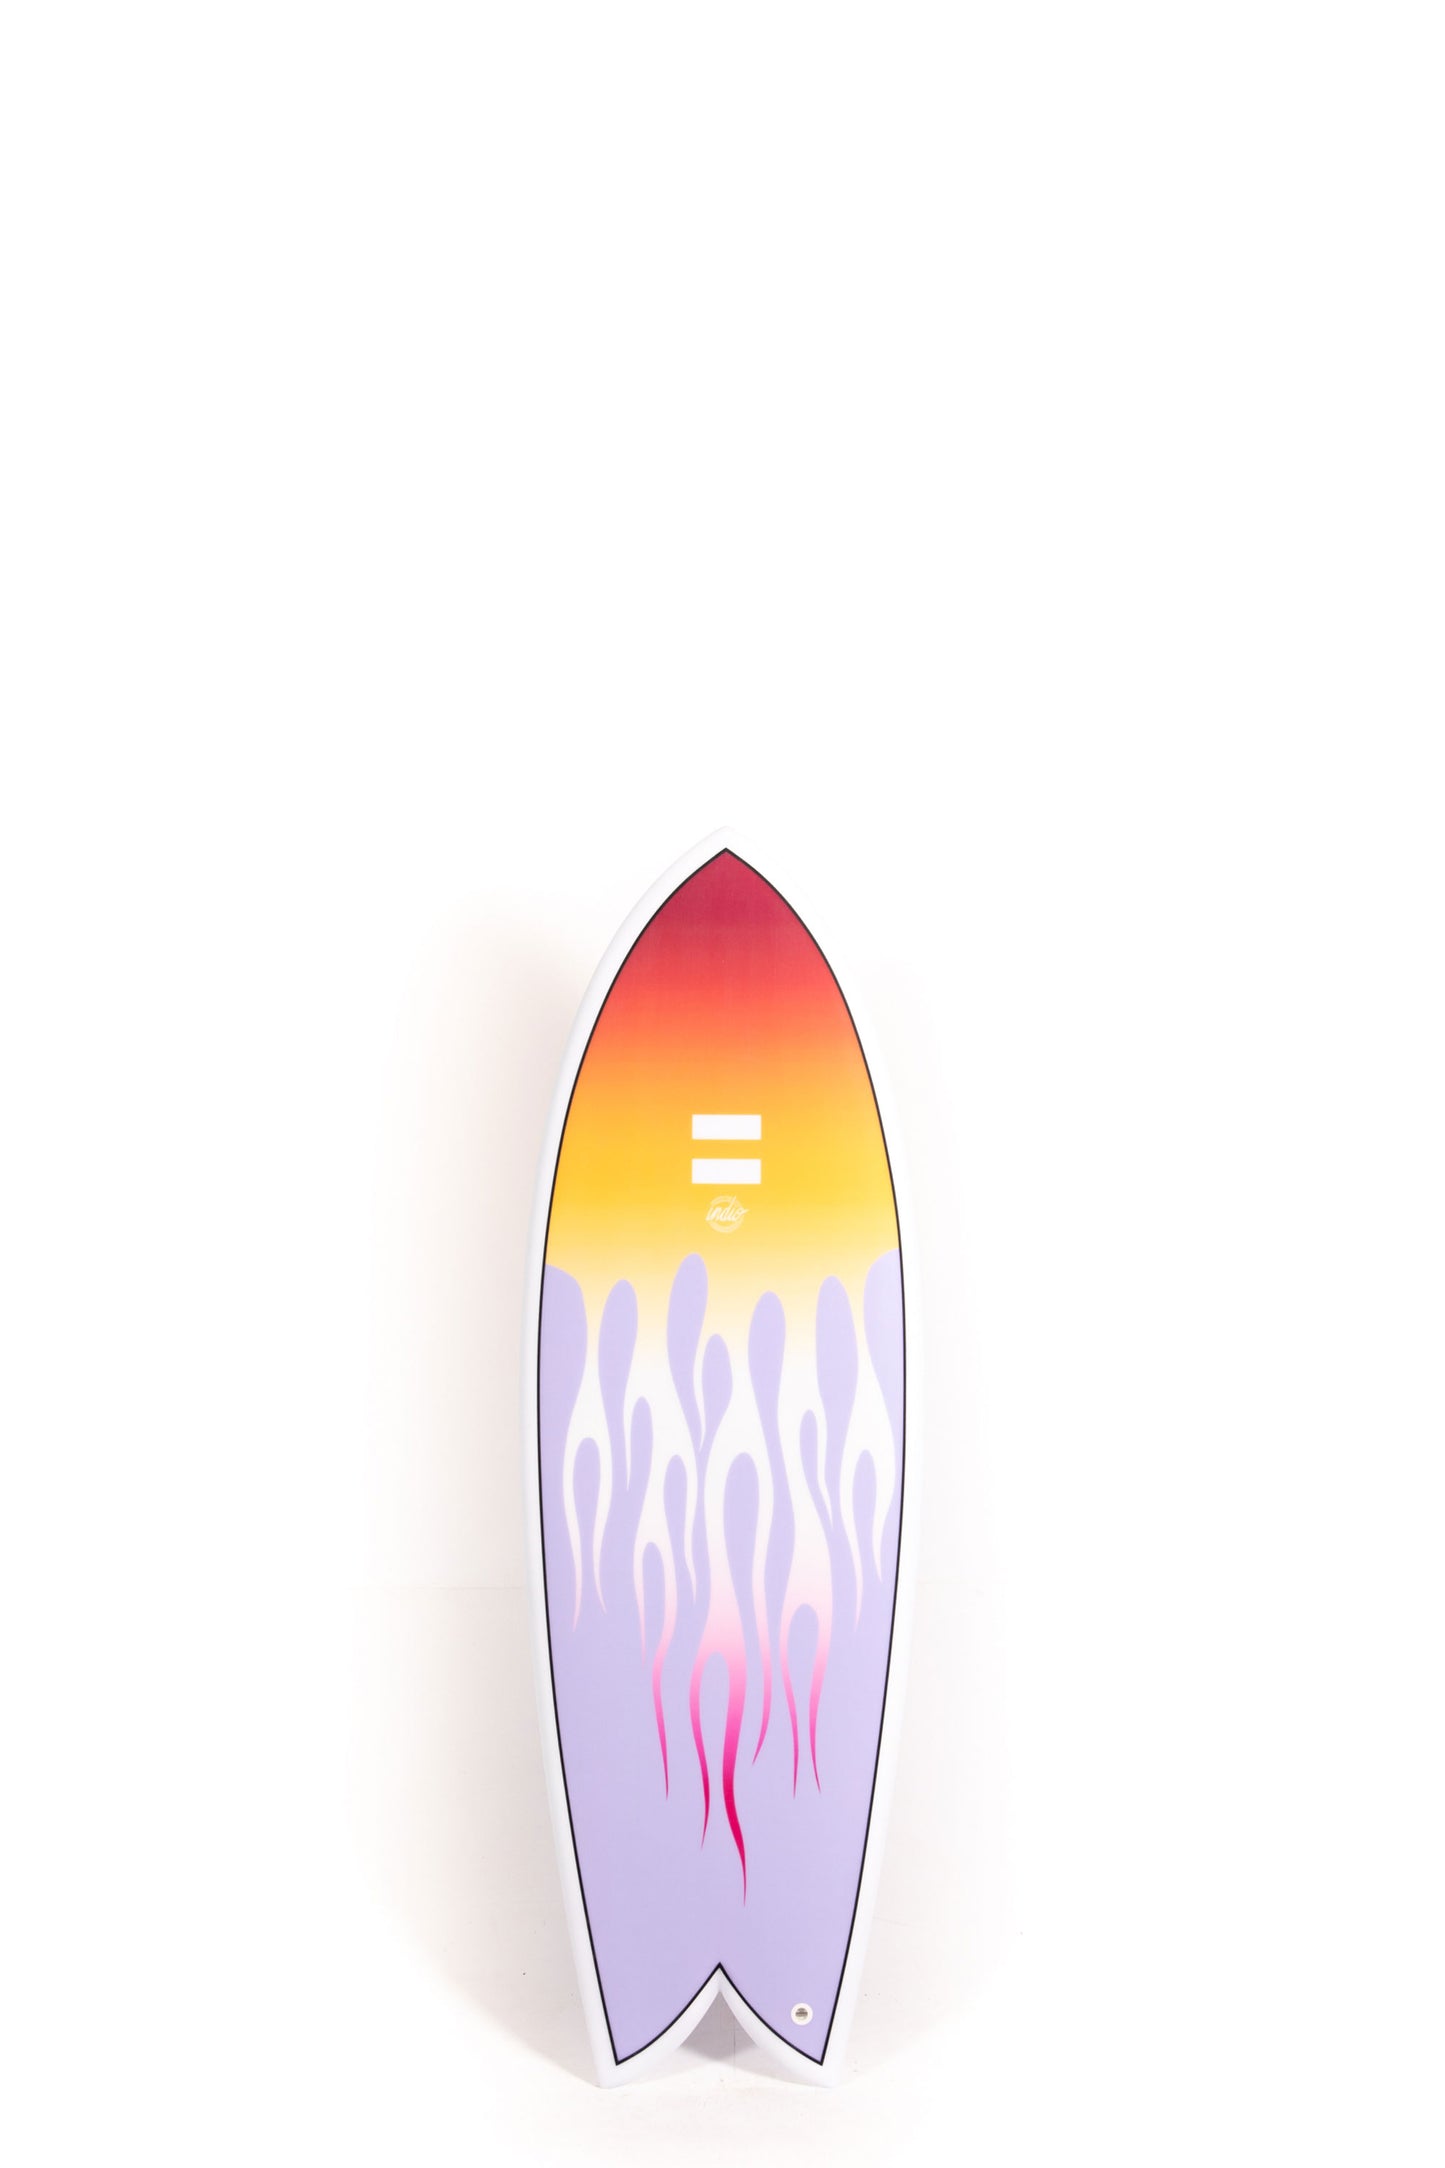 Pukas-Surf-Shop-Indio-Surfboards-Dab-fire-5_5_